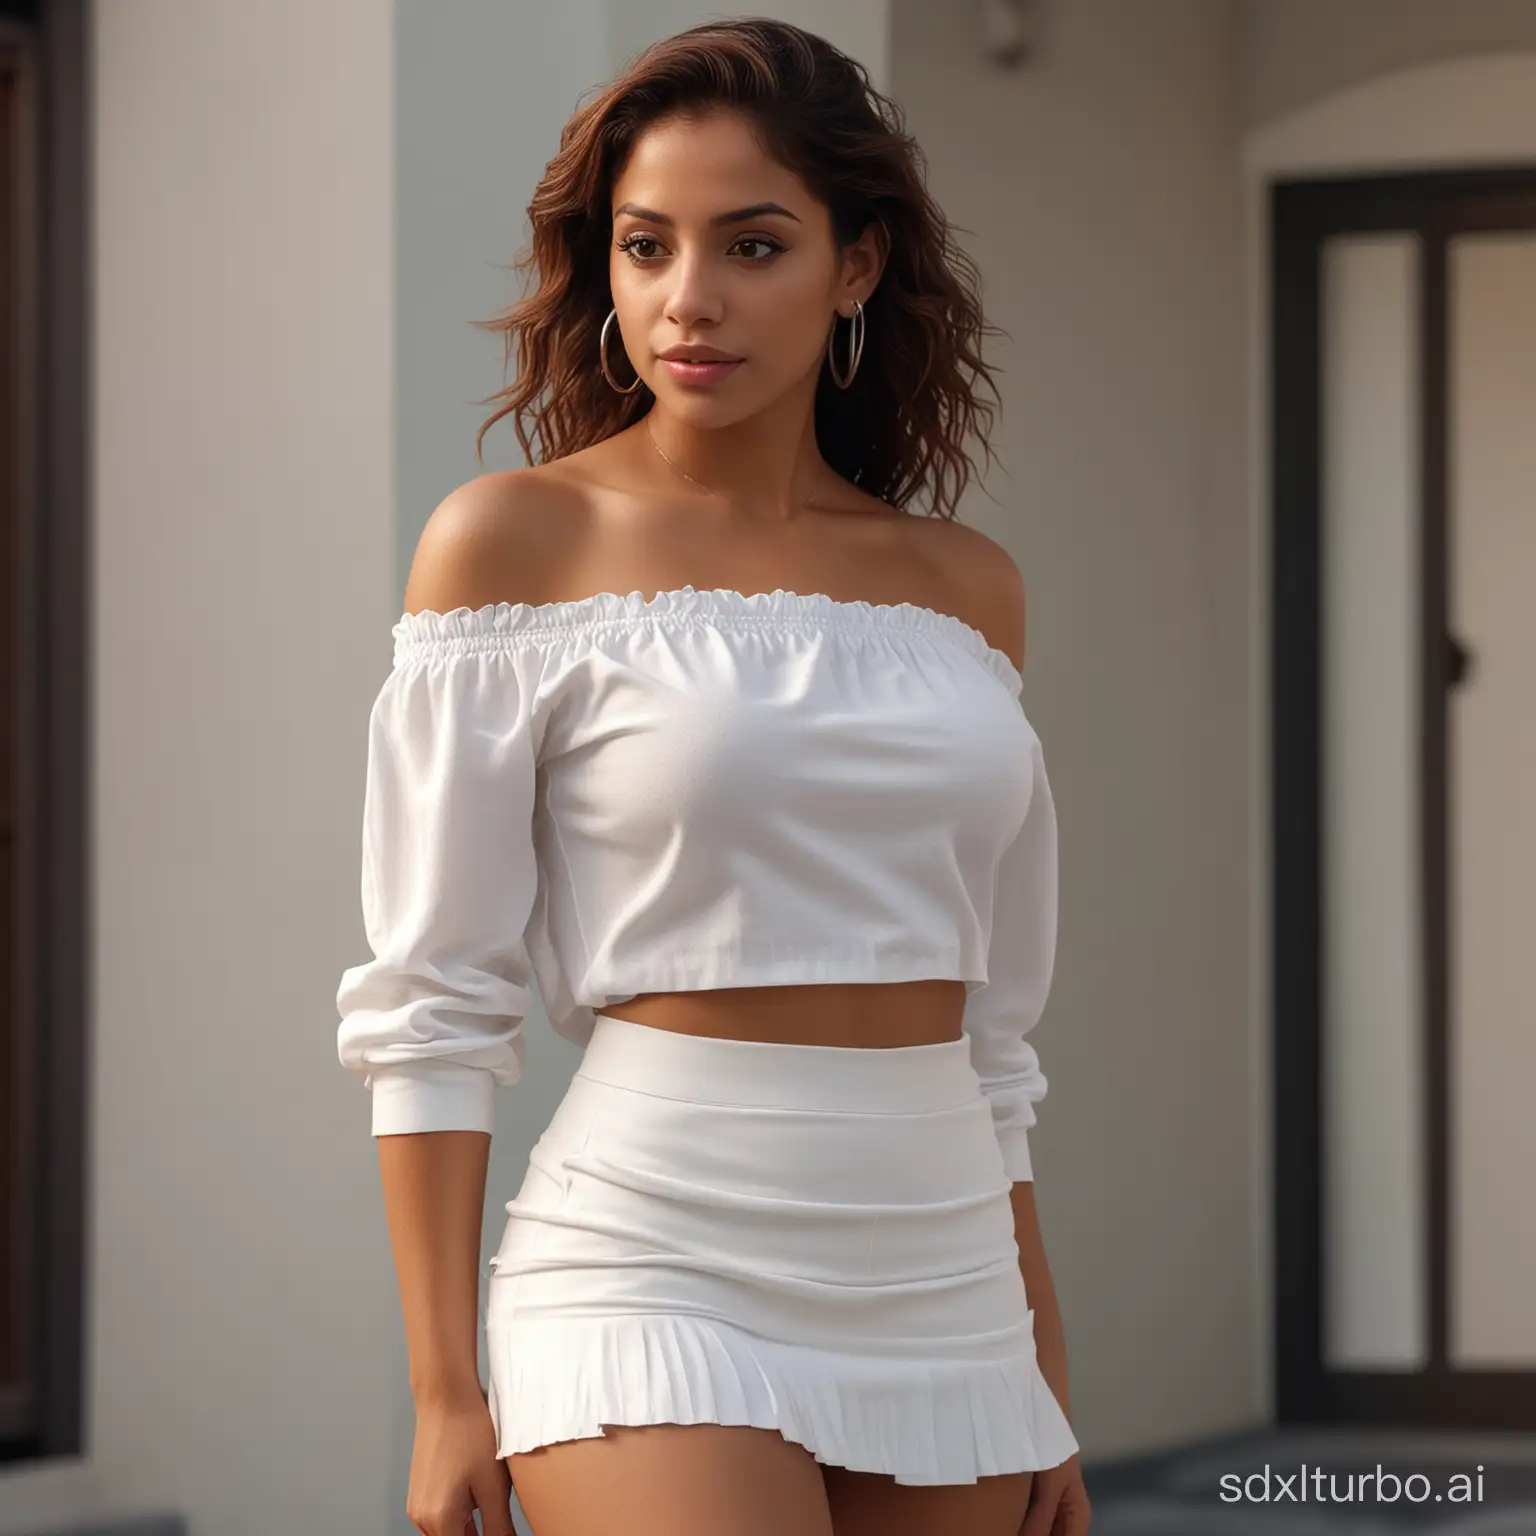 Attractive young Puerto Rican woman, wearing a miniskirt , and a over the shoulder white blose, 4k resolution, ar 16:9, cinematic, super-realistic